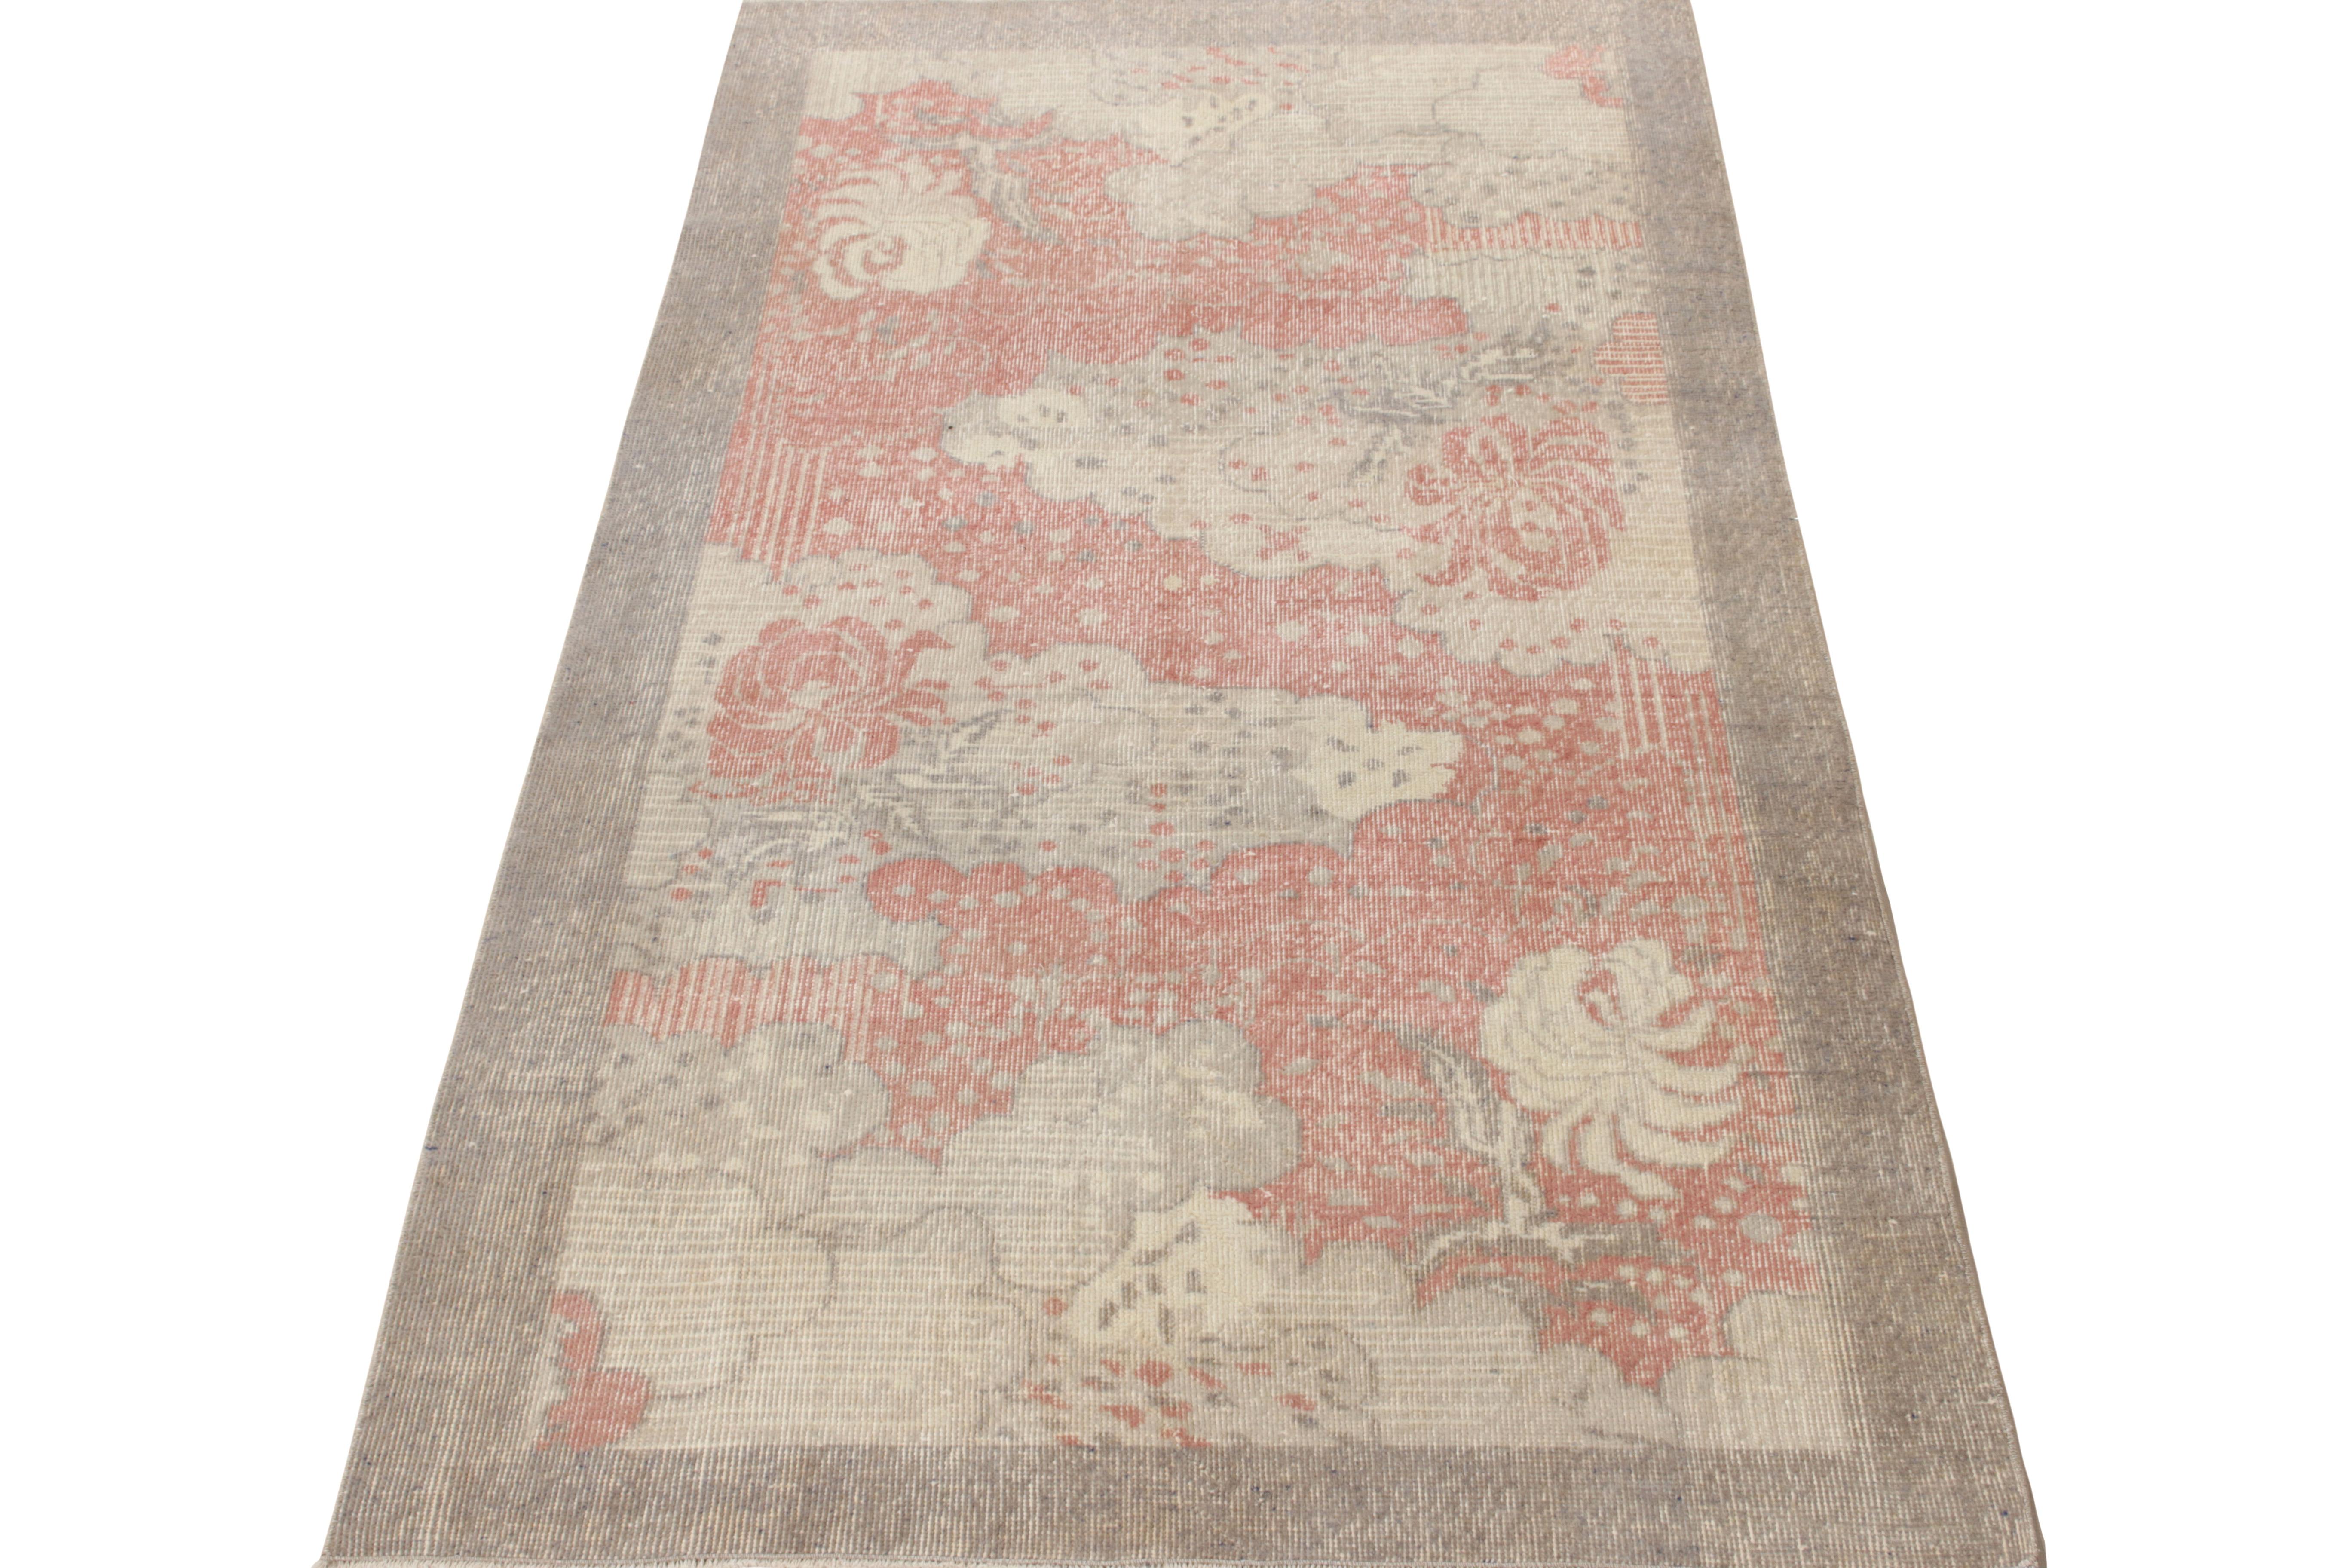 Originating from Turkey circa 1960-1970, a vintage deco rug from a commemorative Turkish workshop entering Rug & Kilim’s growing Mid-Century Pasha Collection. Blending mid century modern aesthetics with classic Art Deco sensibilities, the 4x7